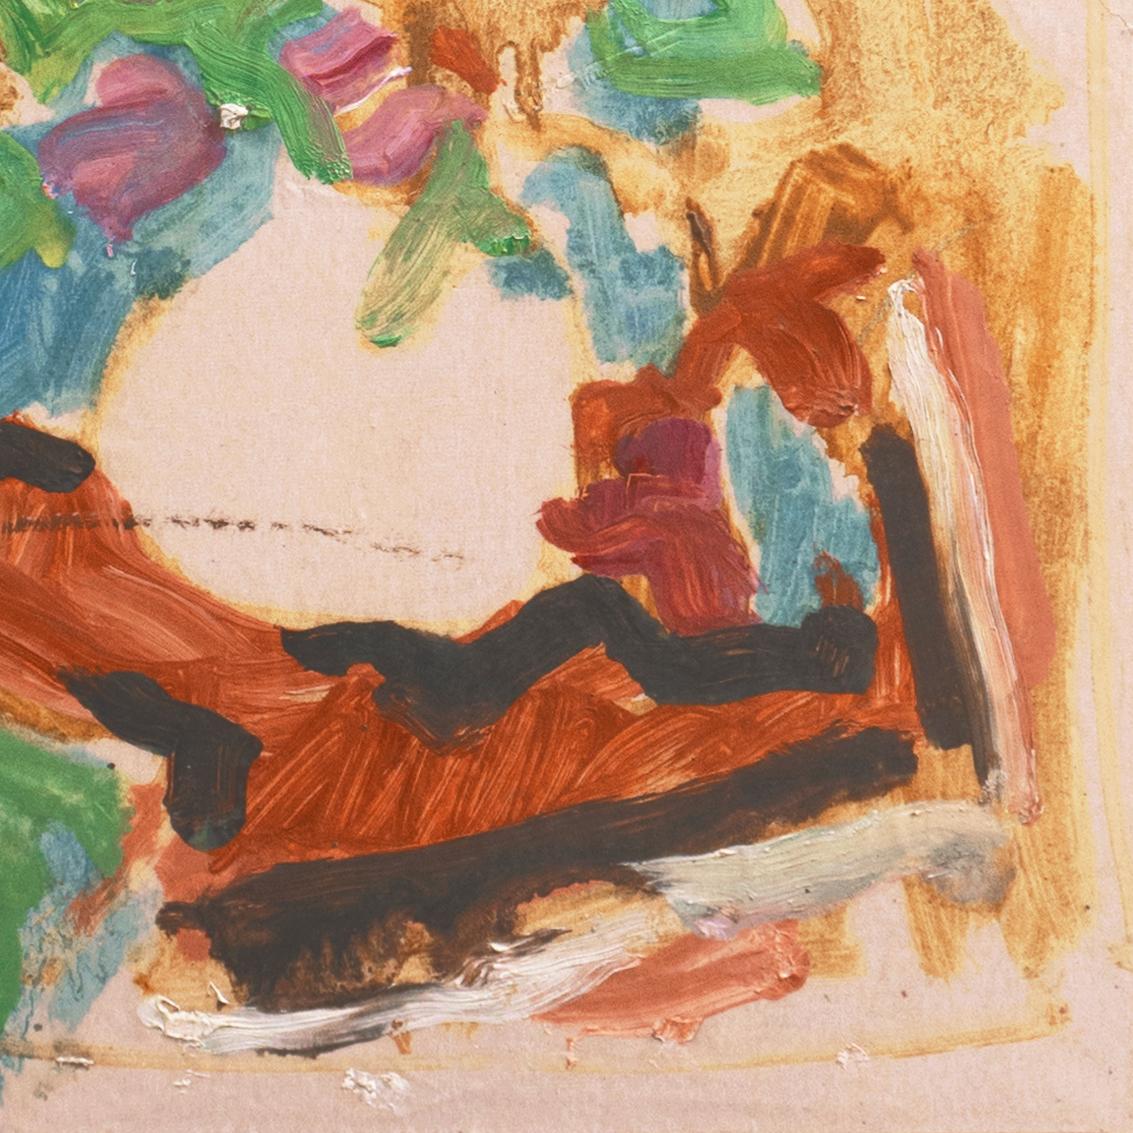 Estate stamp, verso, for Victor Di Gesu (American, 1914-1988) and painted circa 1955.

Winner of the Prix Othon Friesz, Victor di Gesu first attended the Los Angeles Art Center and the Chouinard Art School before moving to Paris where he studied